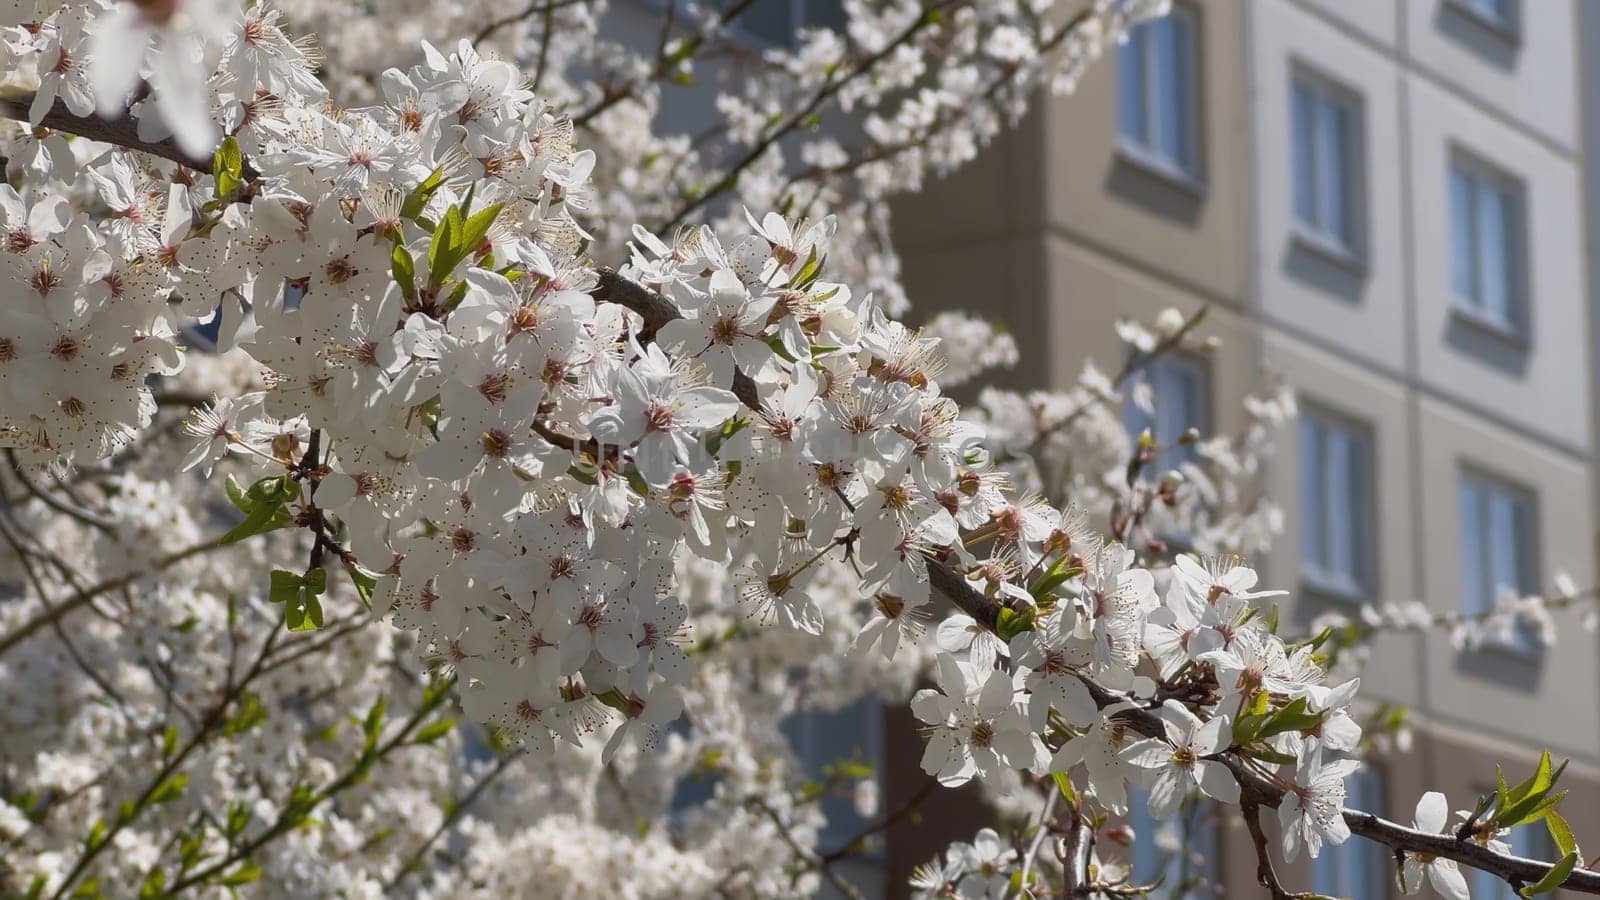 White flowers on a tree on a spring day in the city